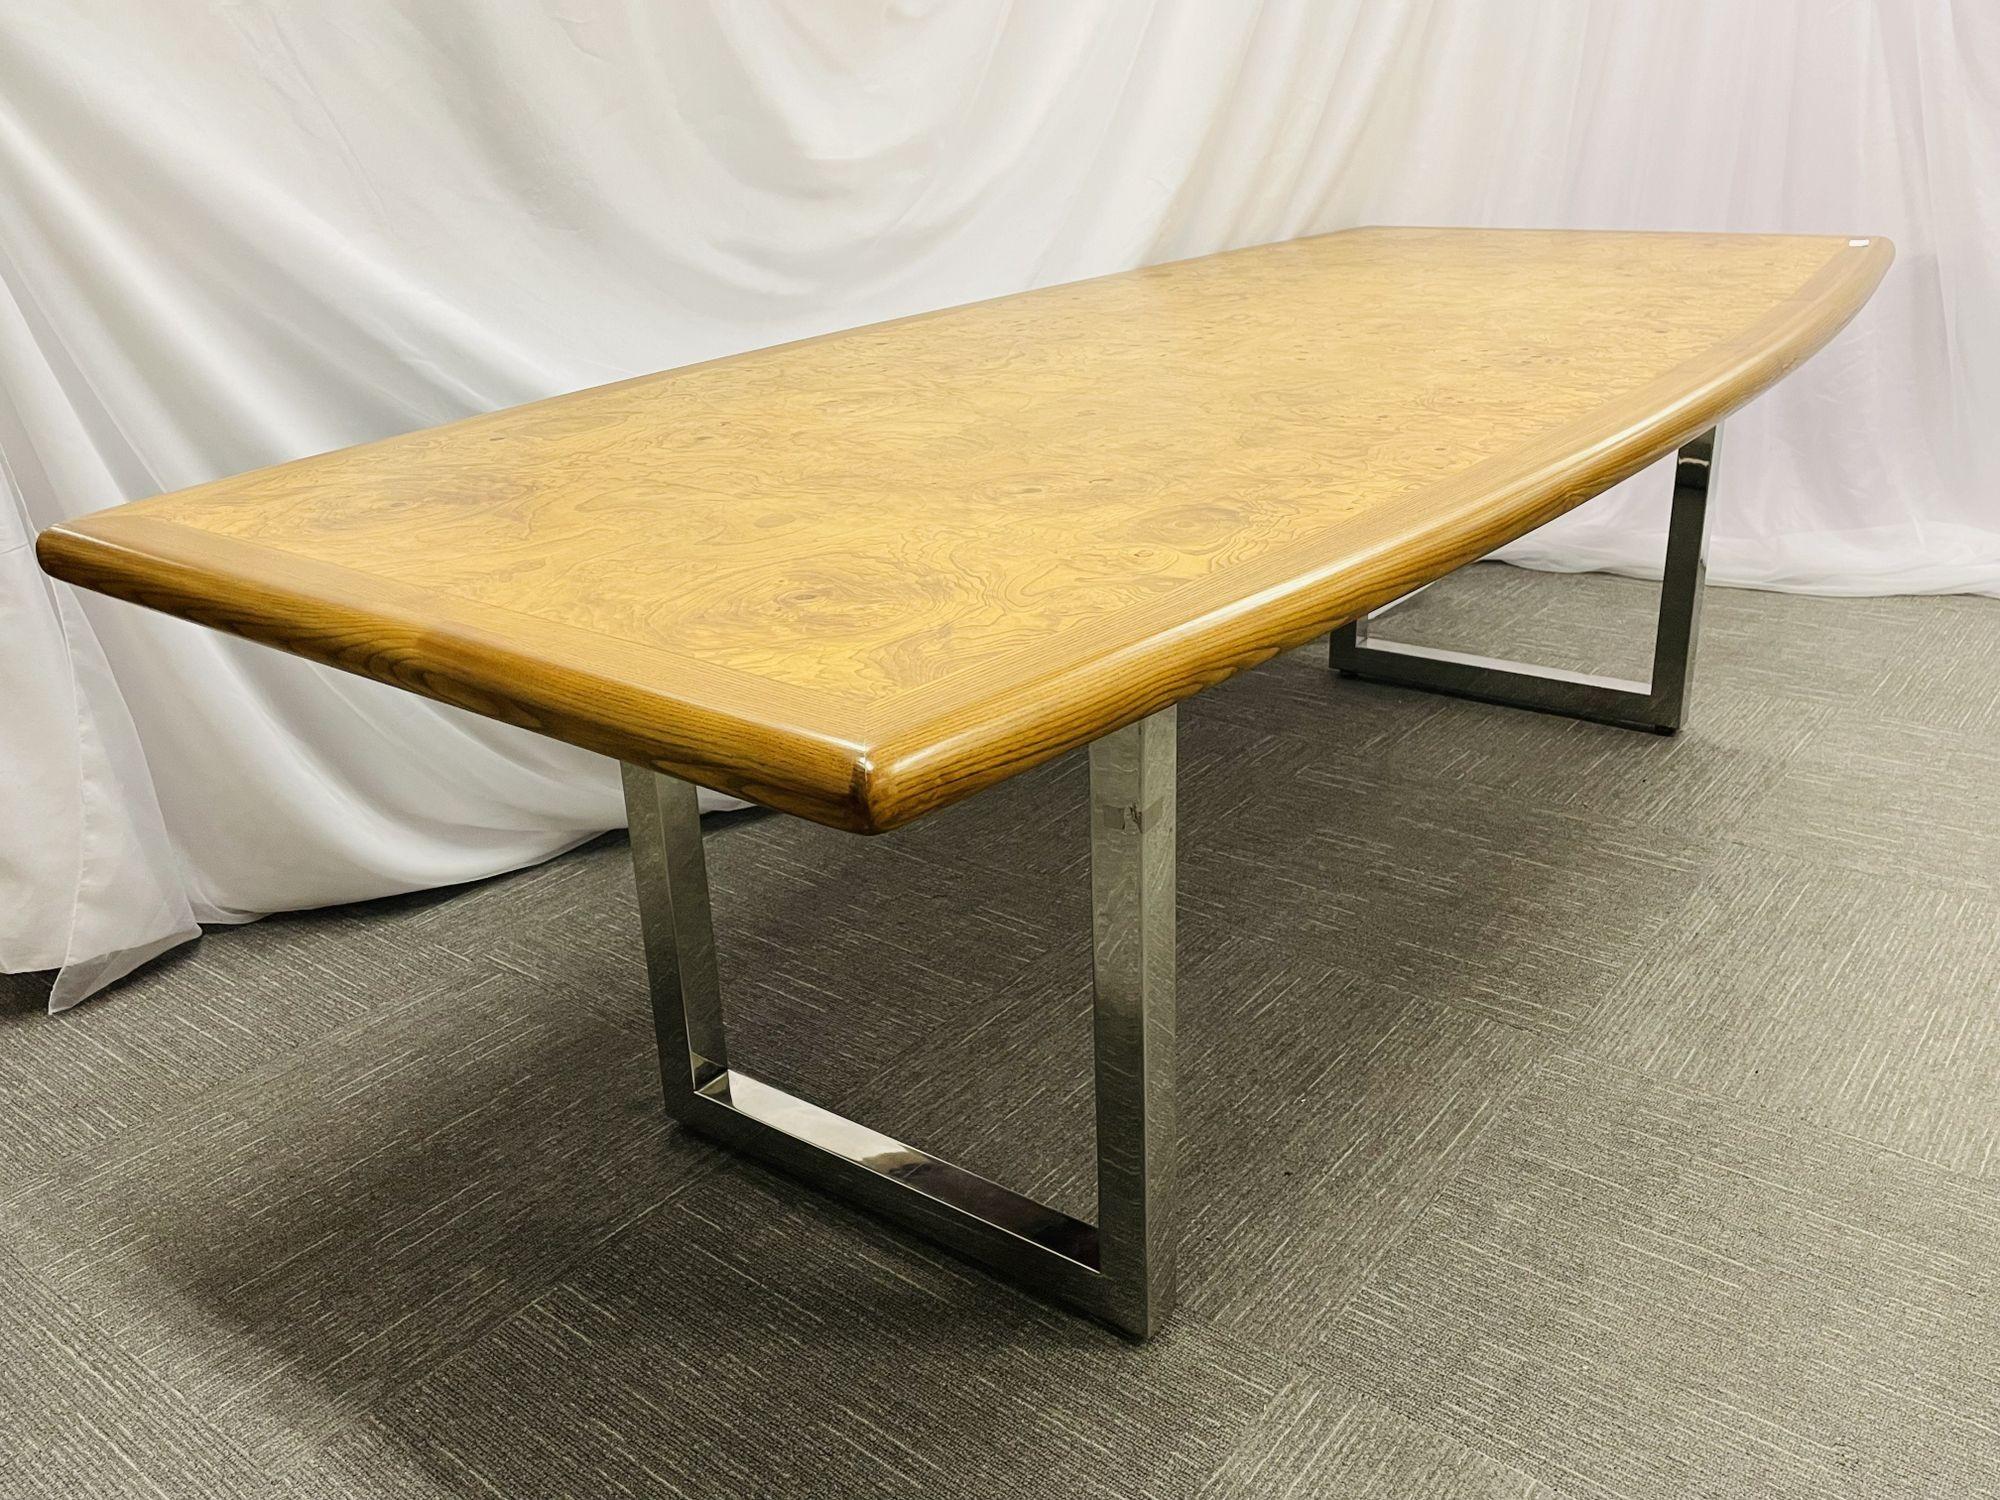 Mid-Century Modern Dining / Conference Table, Burl Wood, Chrome, American, 1960s For Sale 7